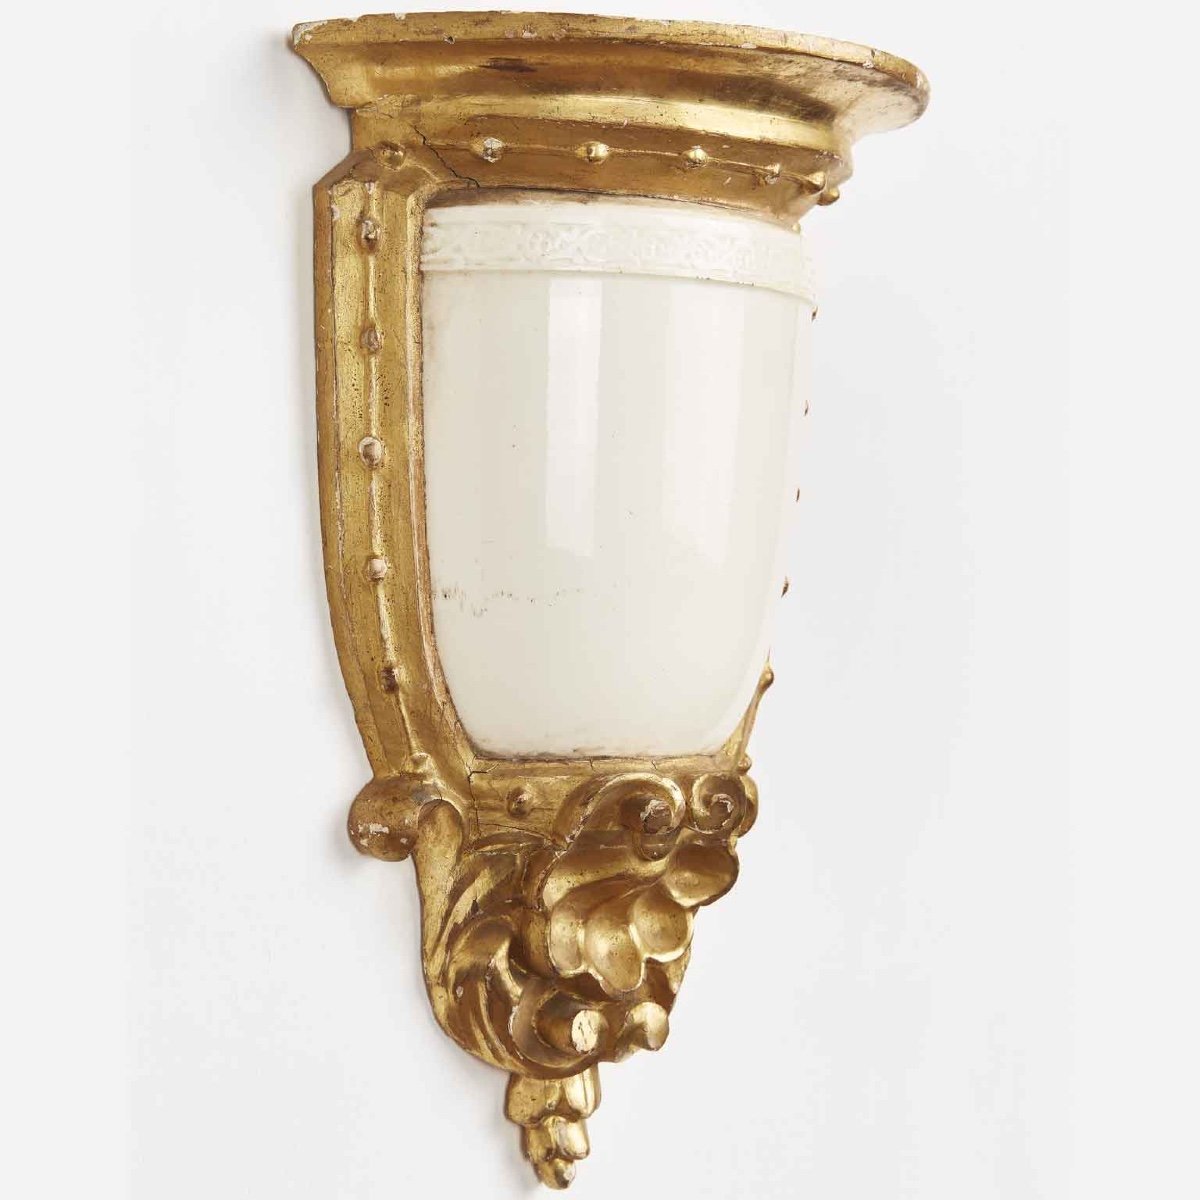 Pair Of Italian Neoclassical Giltwood Wall Brackets Sconces With Maiolica Giustiniani 19th-photo-3